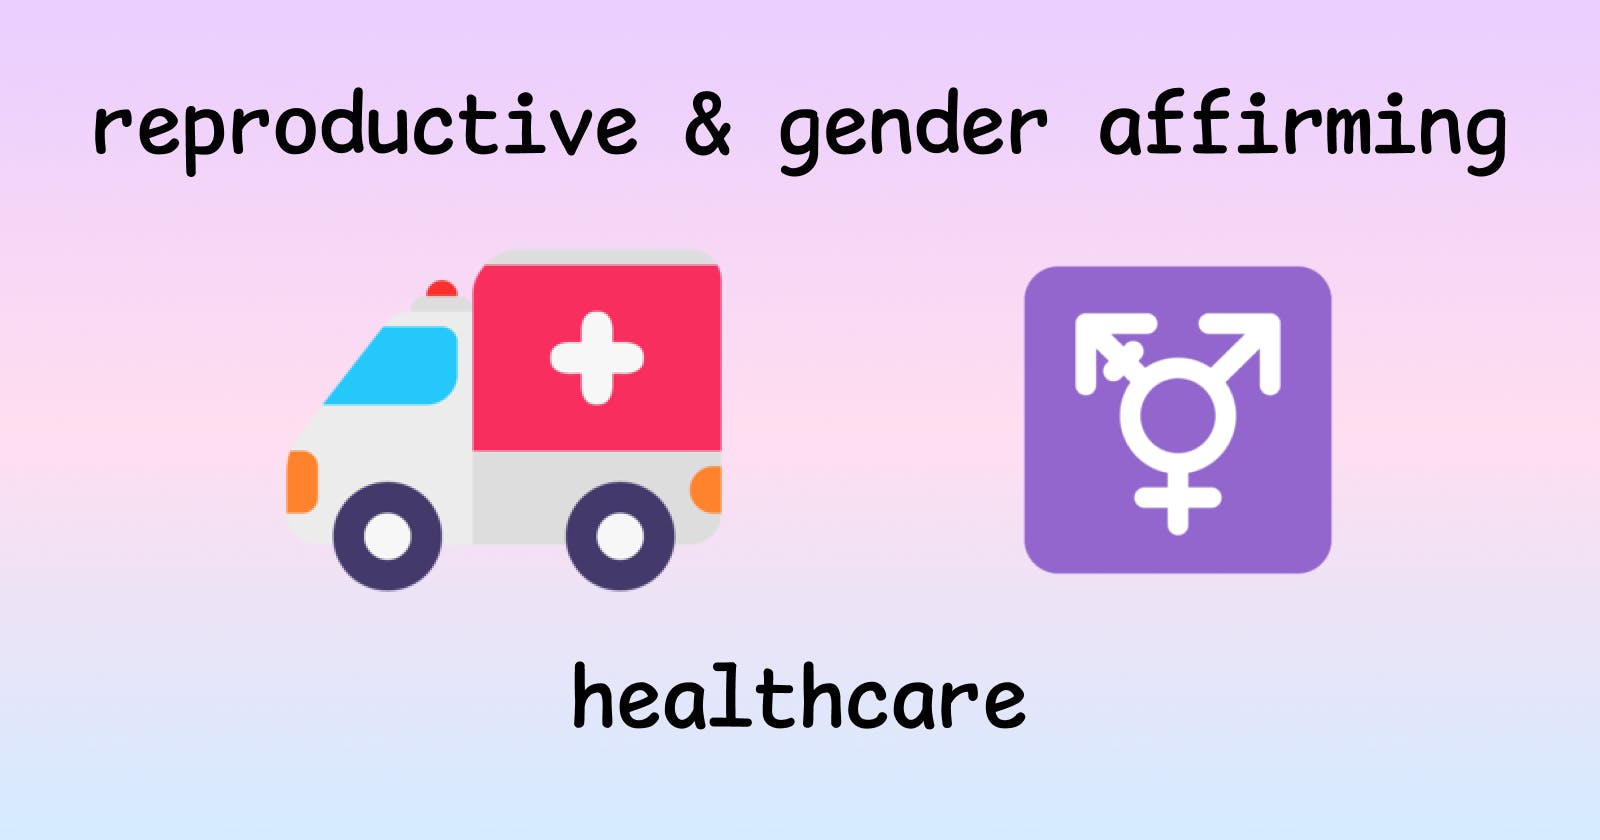 Resources for accessing abortions and gender-affirming care